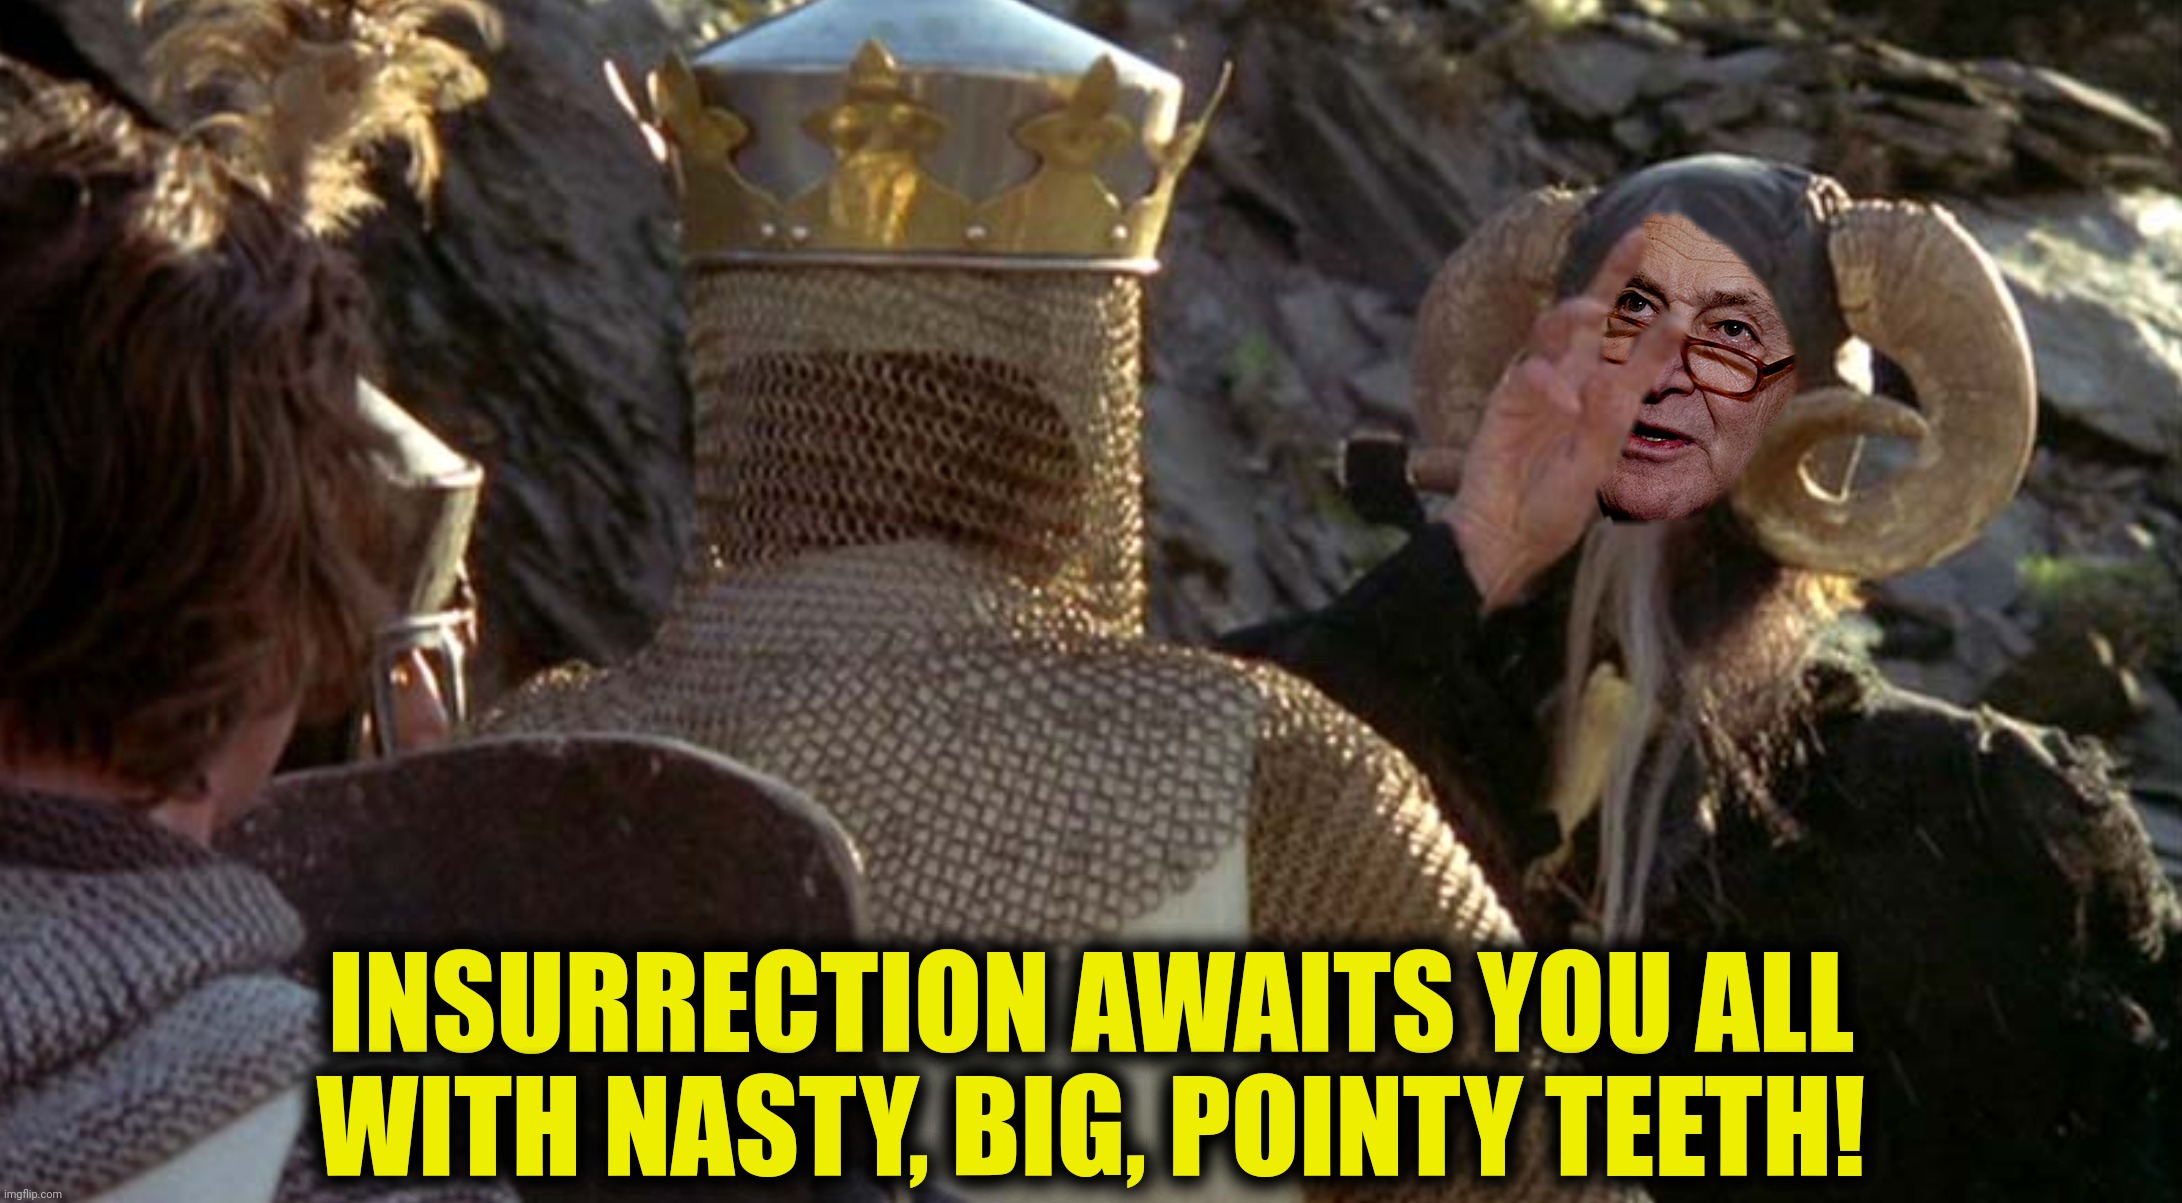 INSURRECTION AWAITS YOU ALL WITH NASTY, BIG, POINTY TEETH! | made w/ Imgflip meme maker